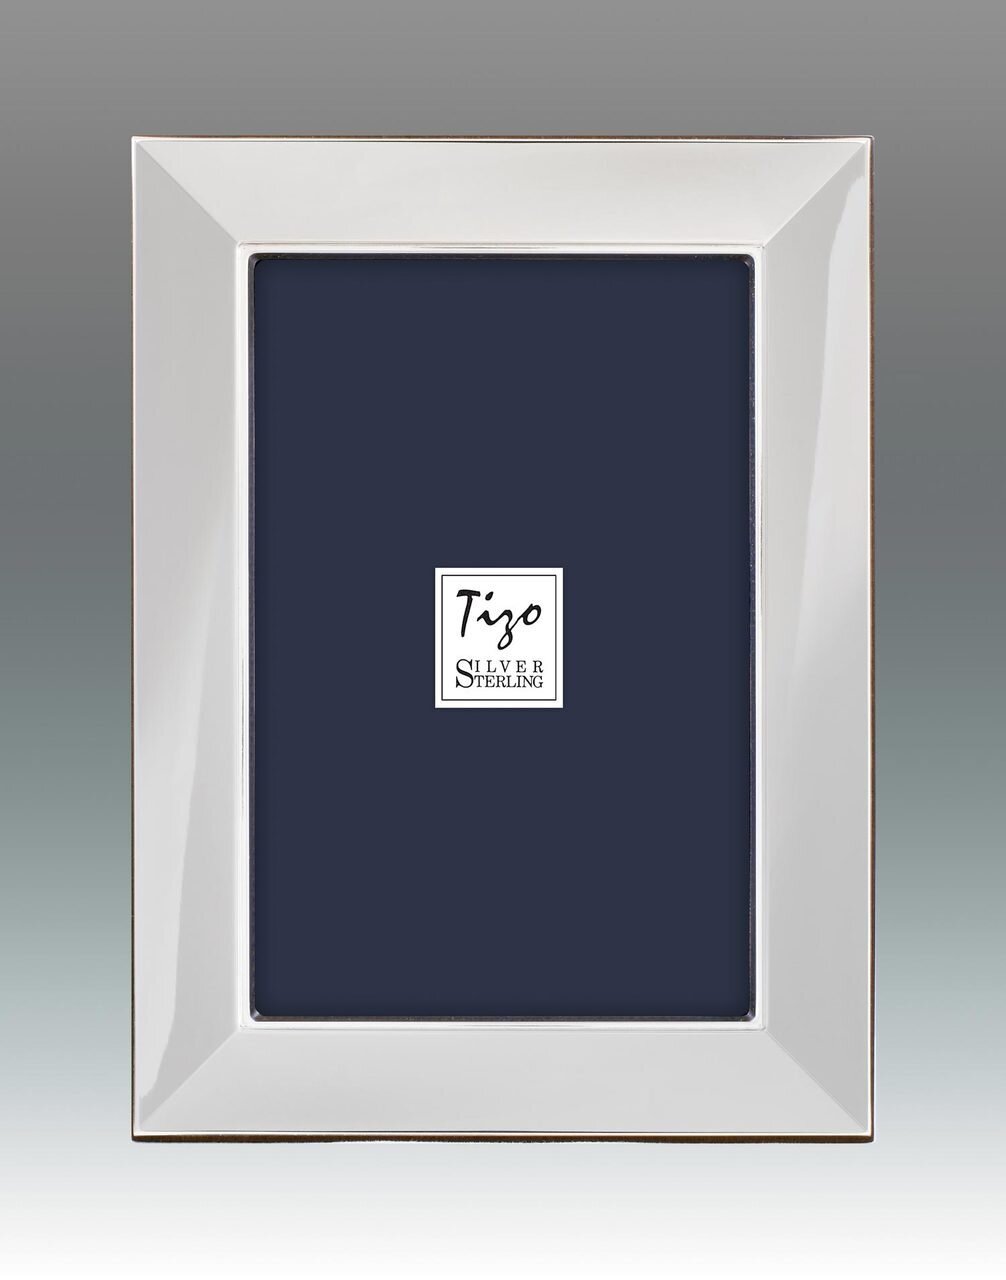 Tizo Empires 4 x 6 Inch Sterling Silver Picture Frame